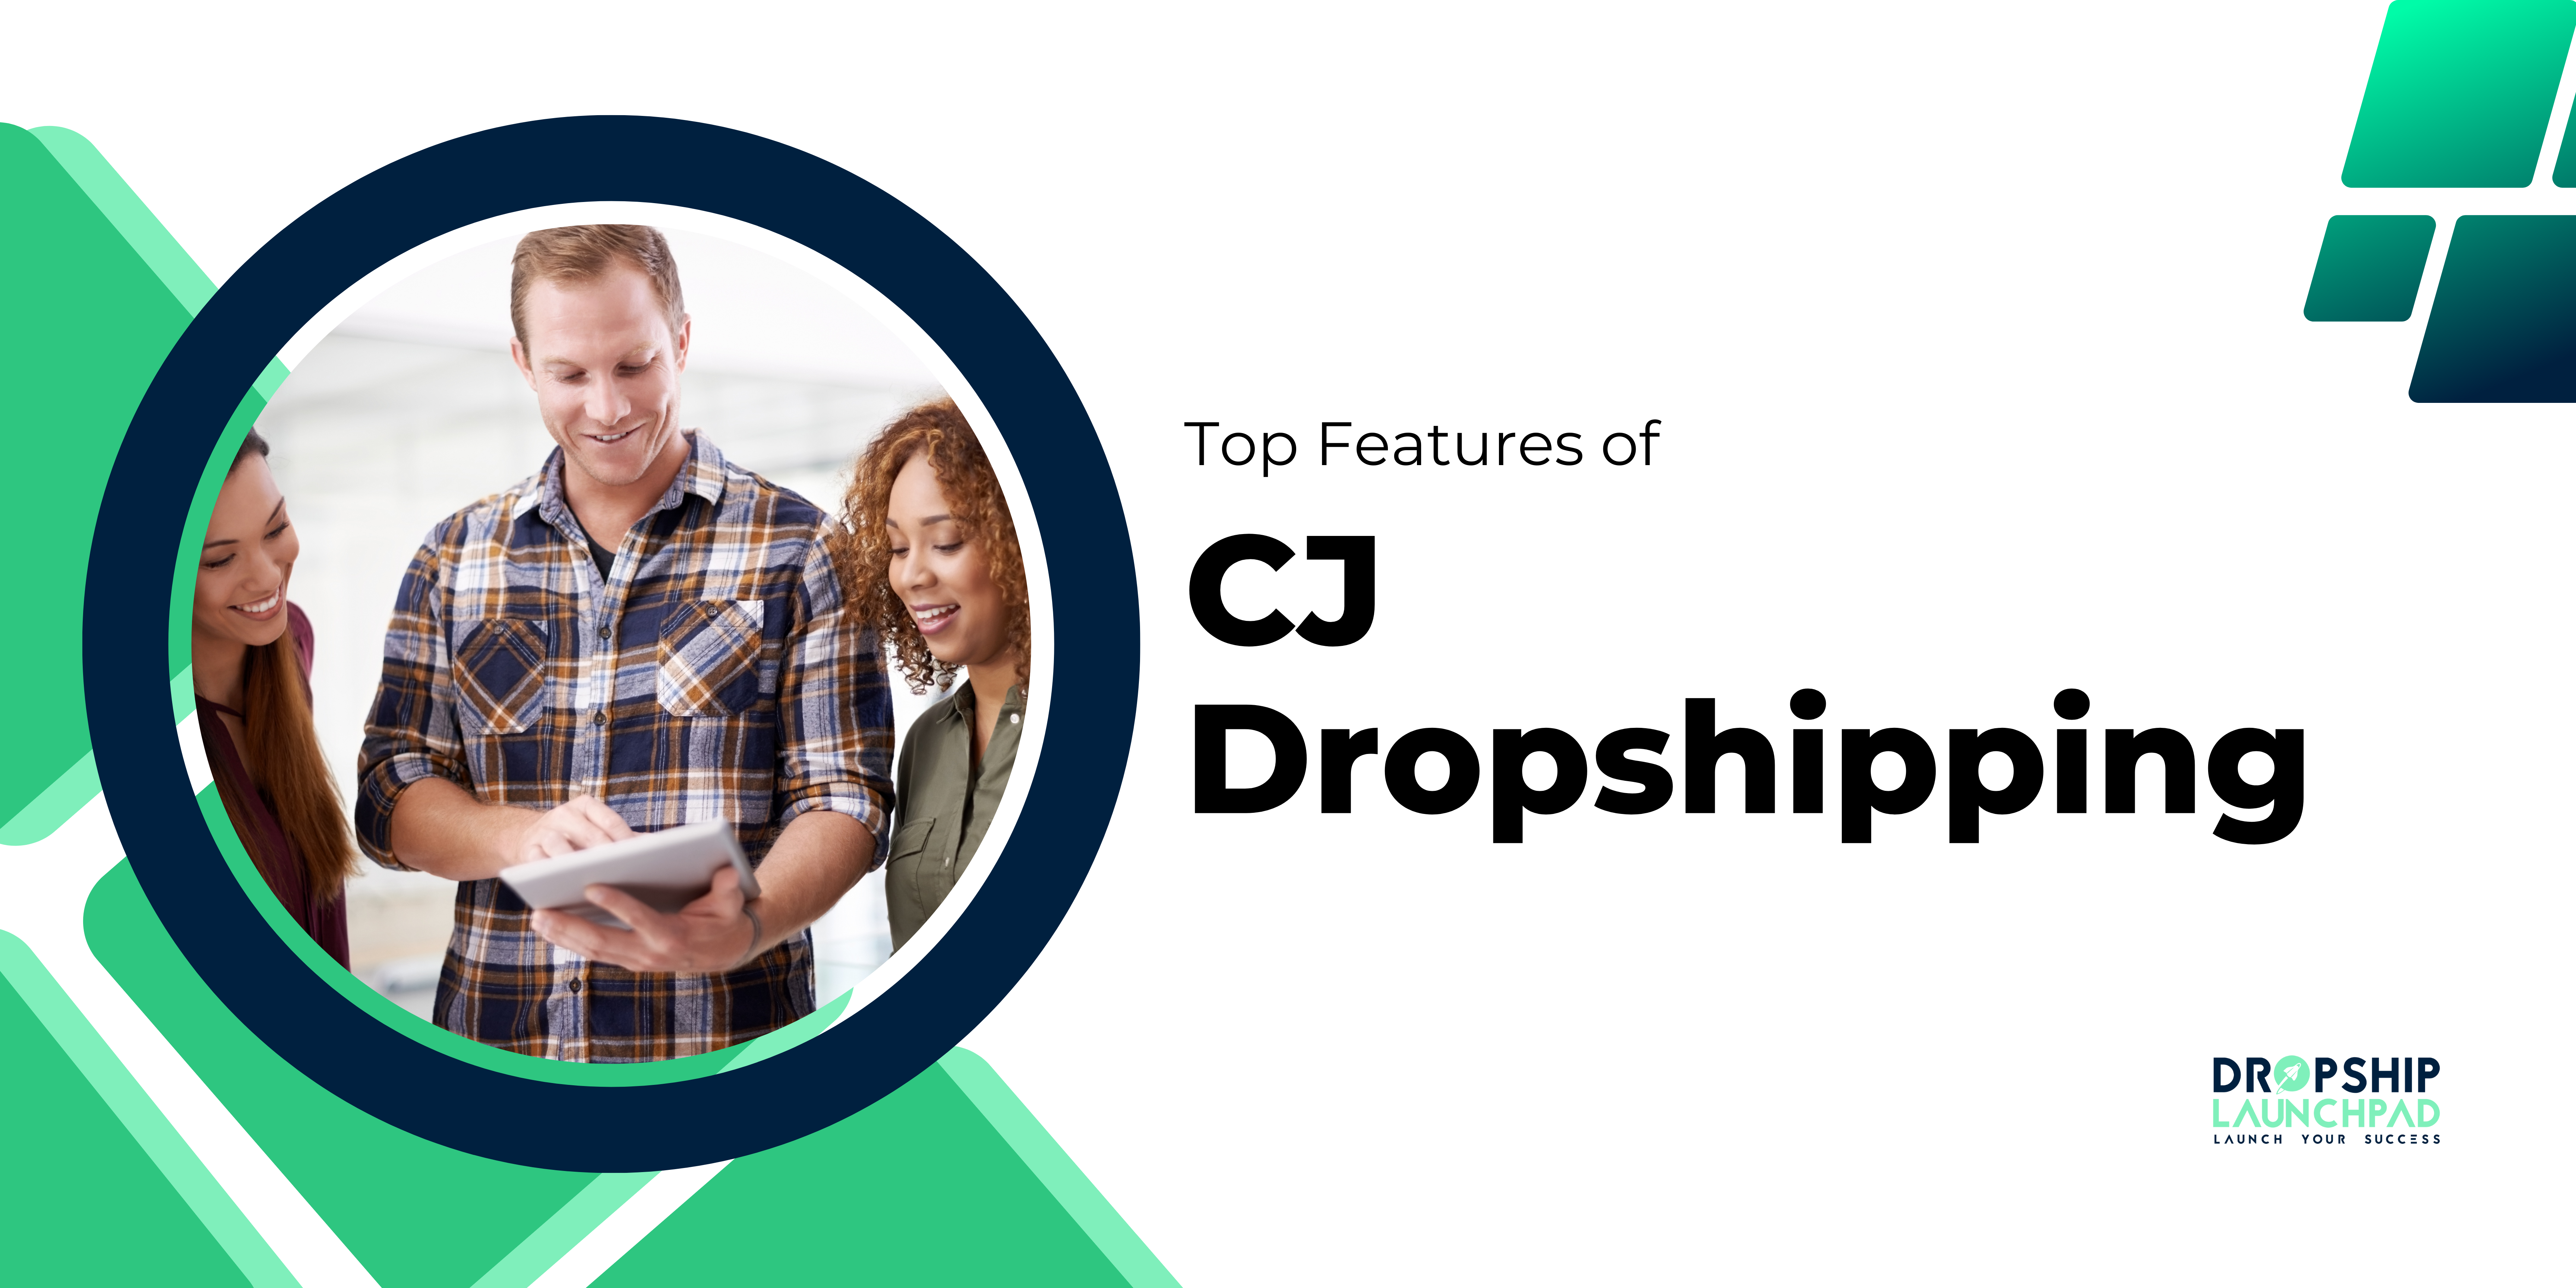 Top Features of CJ Dropshipping